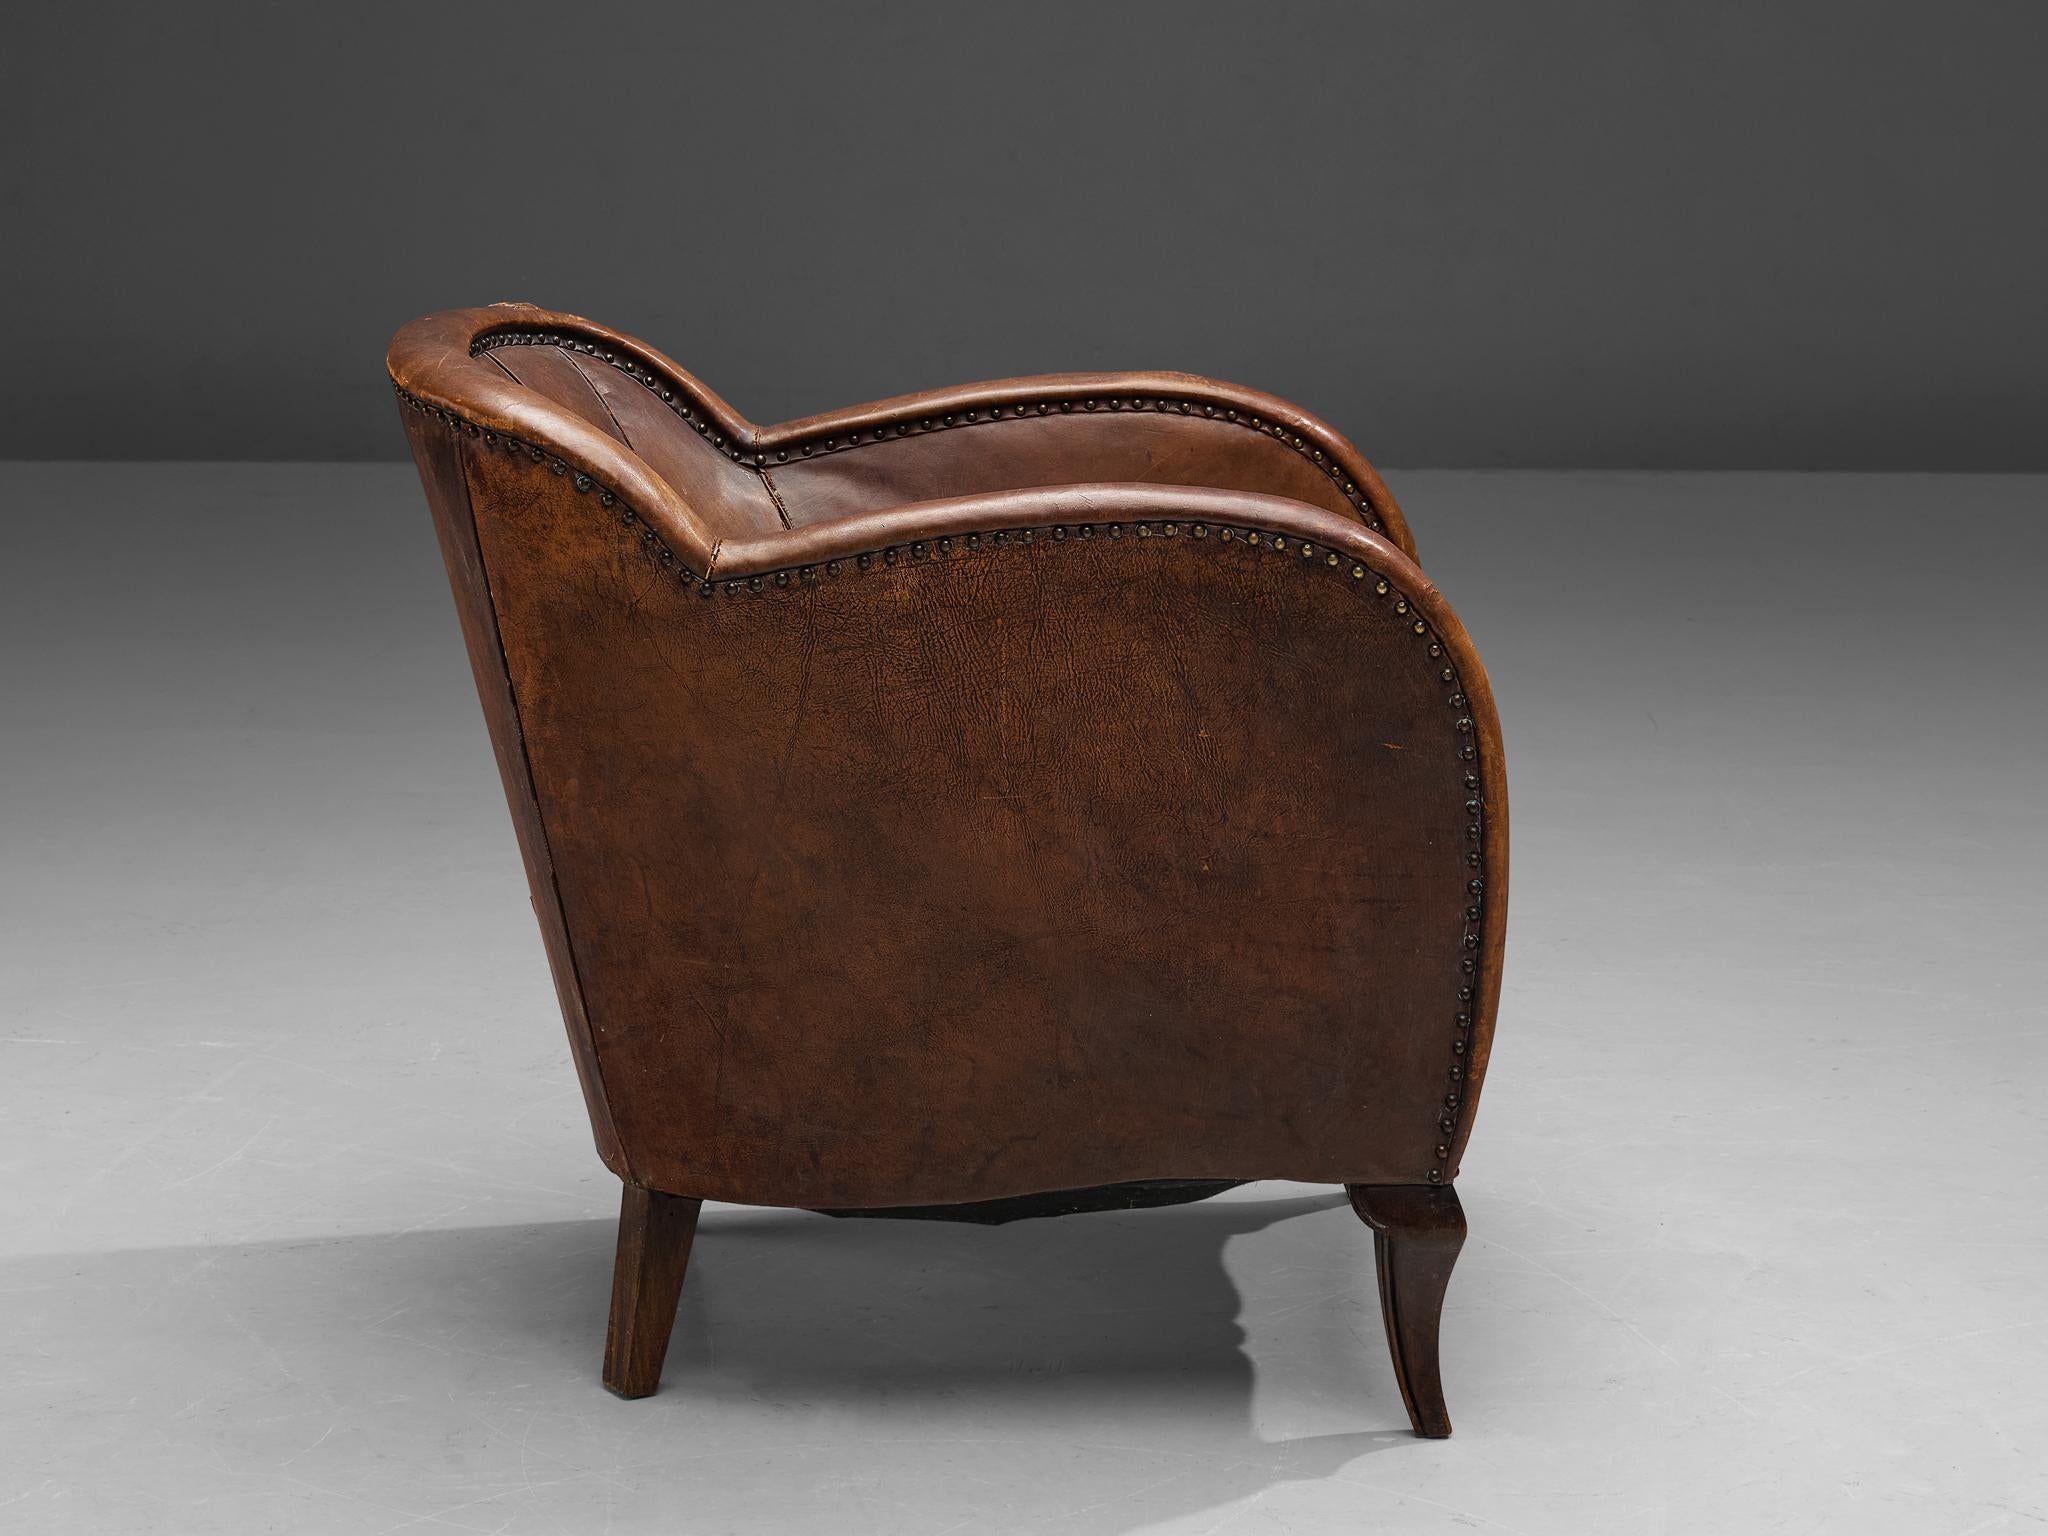 Scandinavian Club Chair in Patinated Cognac Leather